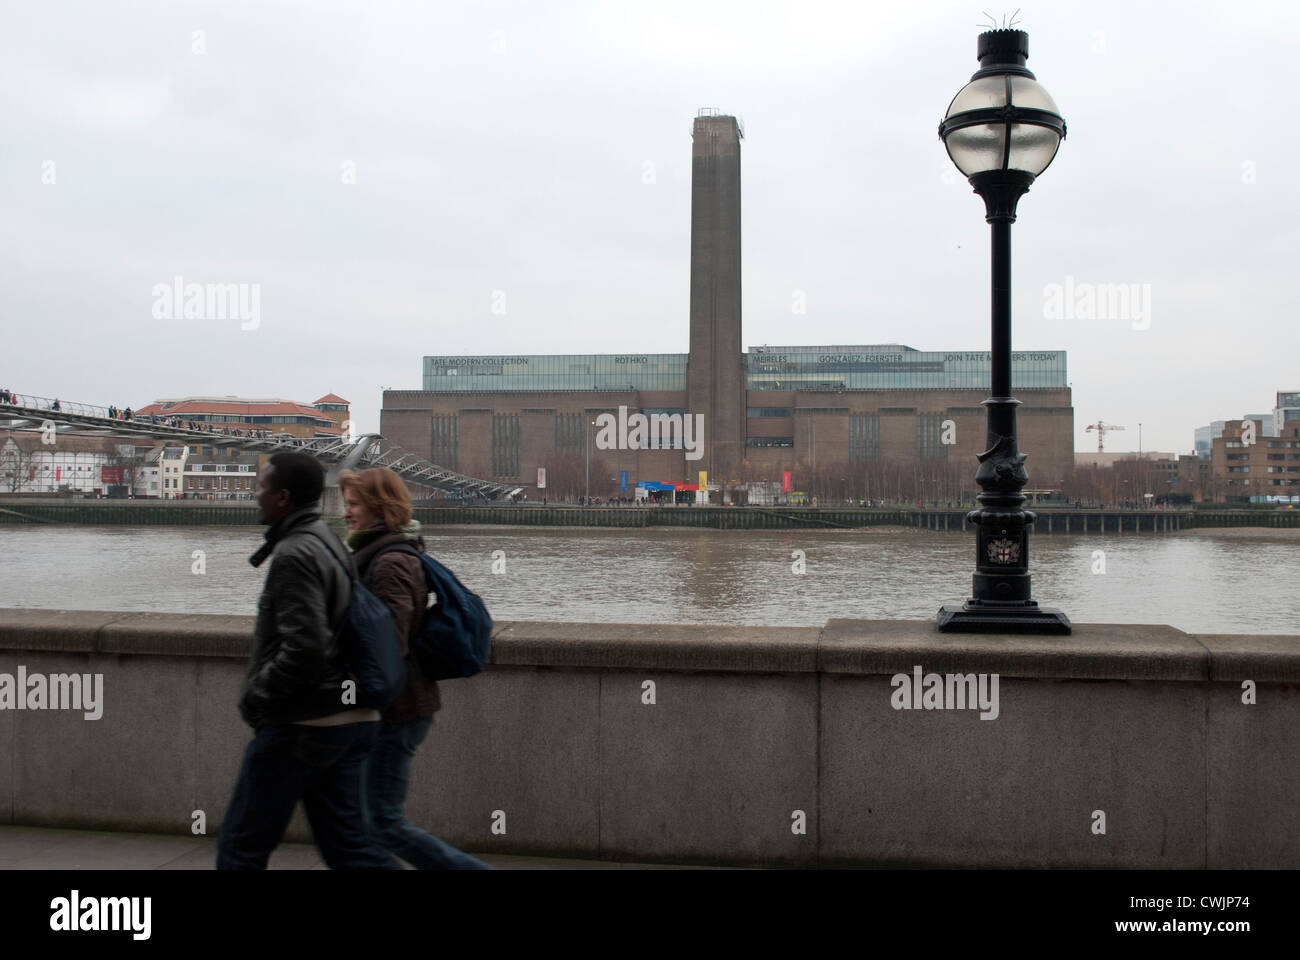 Tate Modern in the Bankside Power Station from the opposite bank of the Thames against a grey sky with a street lamp Stock Photo